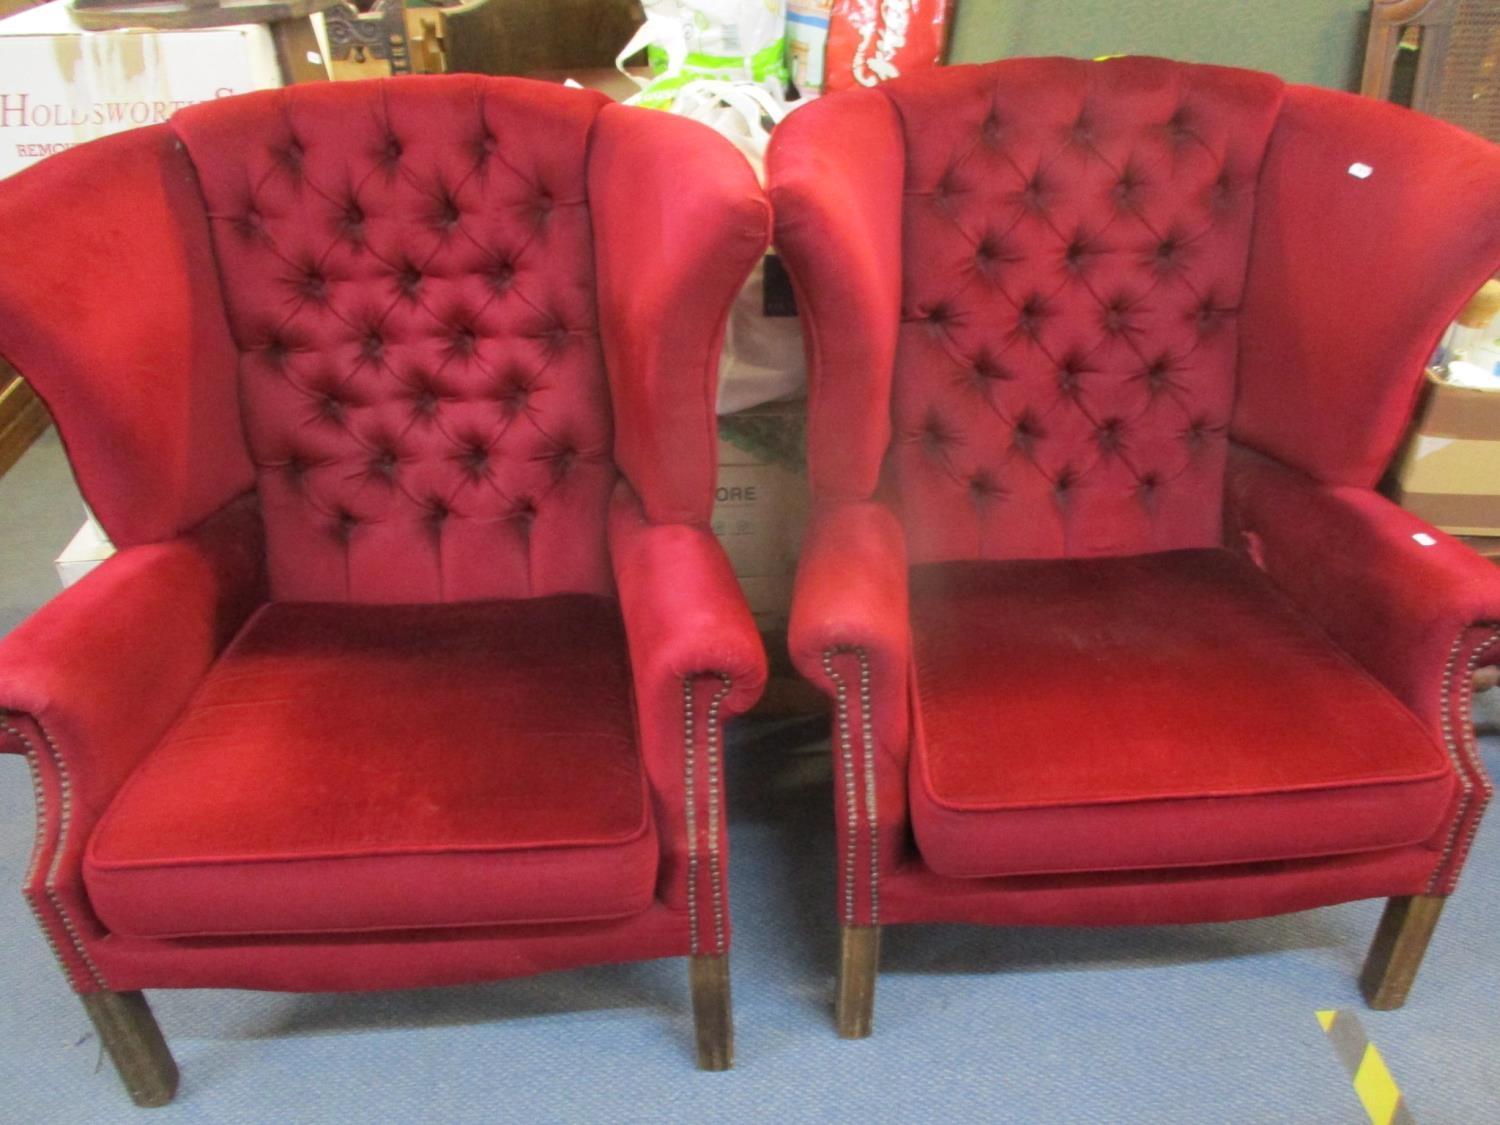 A pair of mid 20th century wing back armchairs in a burgundy valour fabric with stud detail